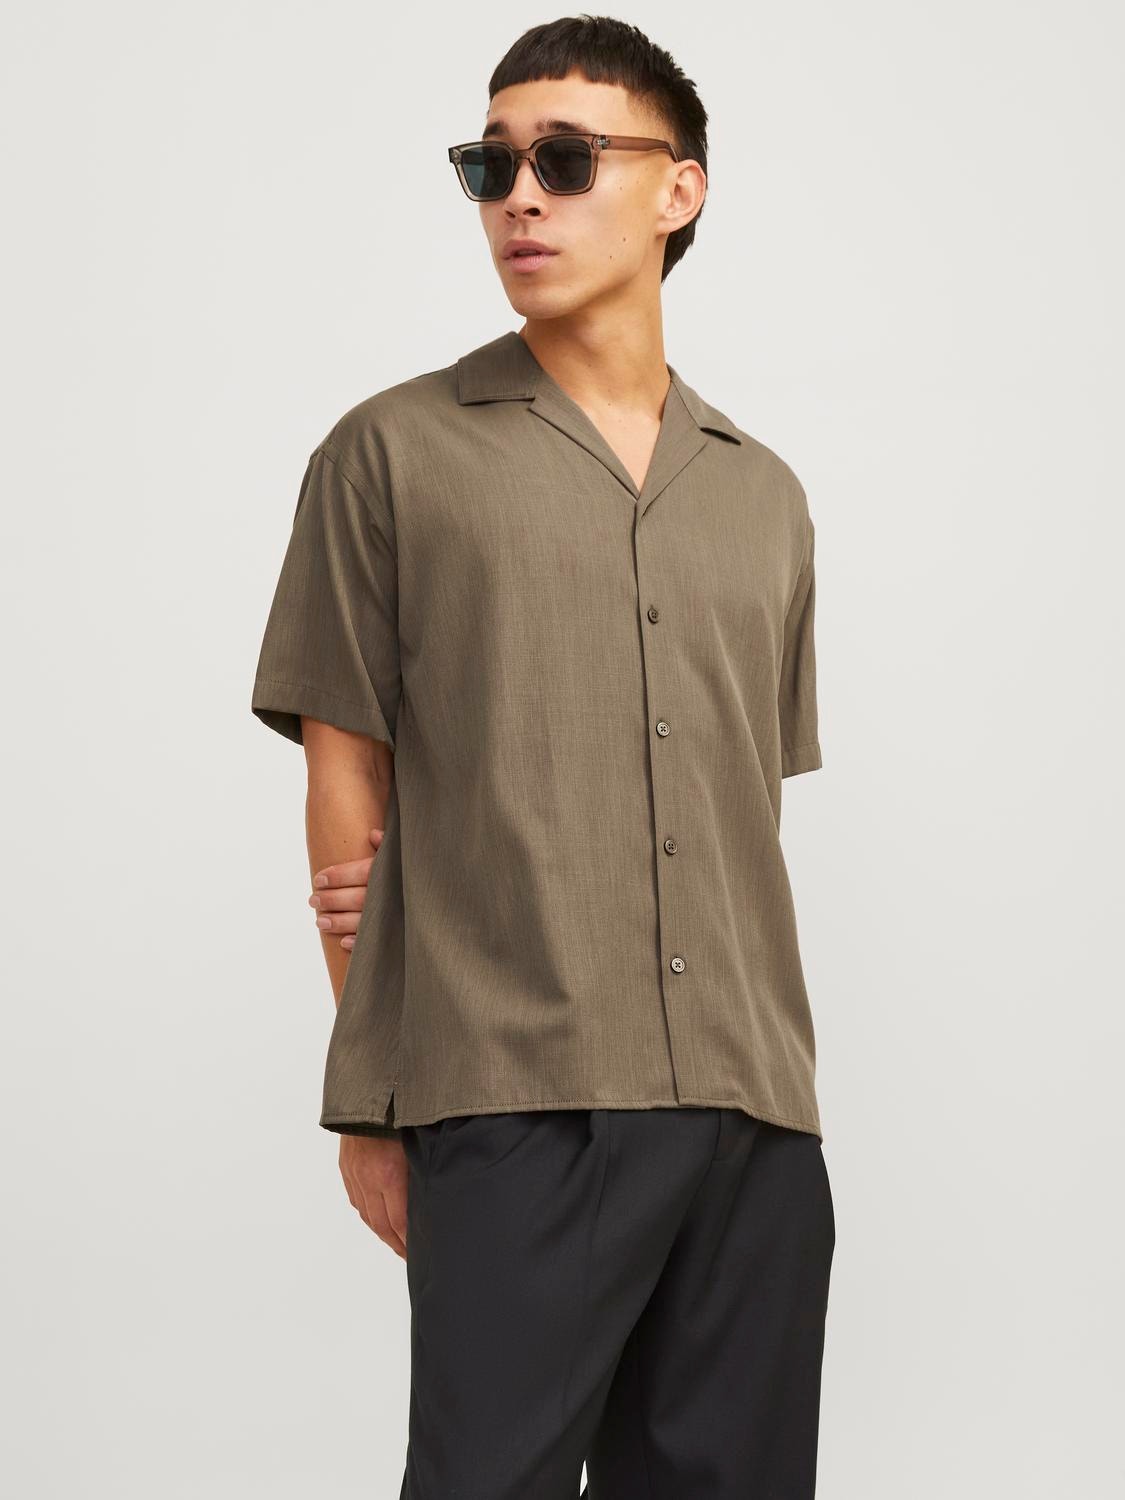 Jack & Jones Camisa Relaxed Fit -Falcon - 12251027